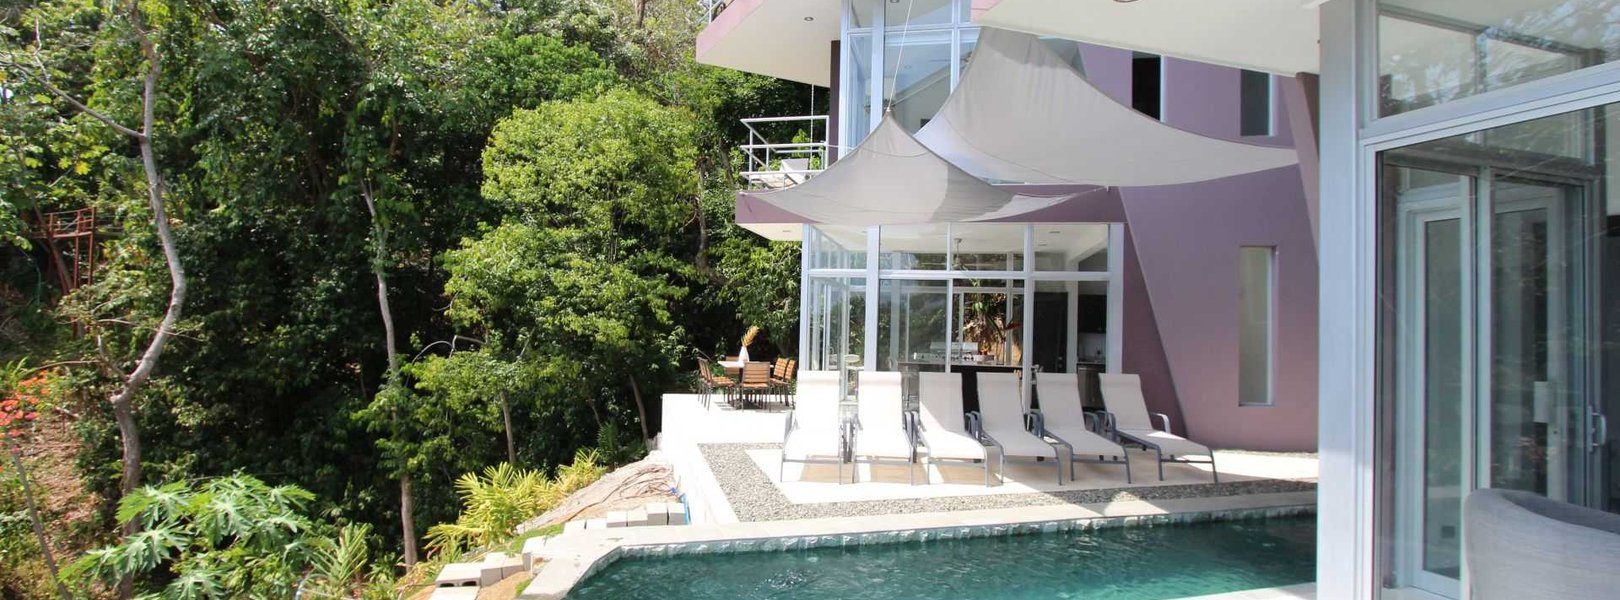 All the common areas have pool access at this luxury rental in Manuel Antonio.